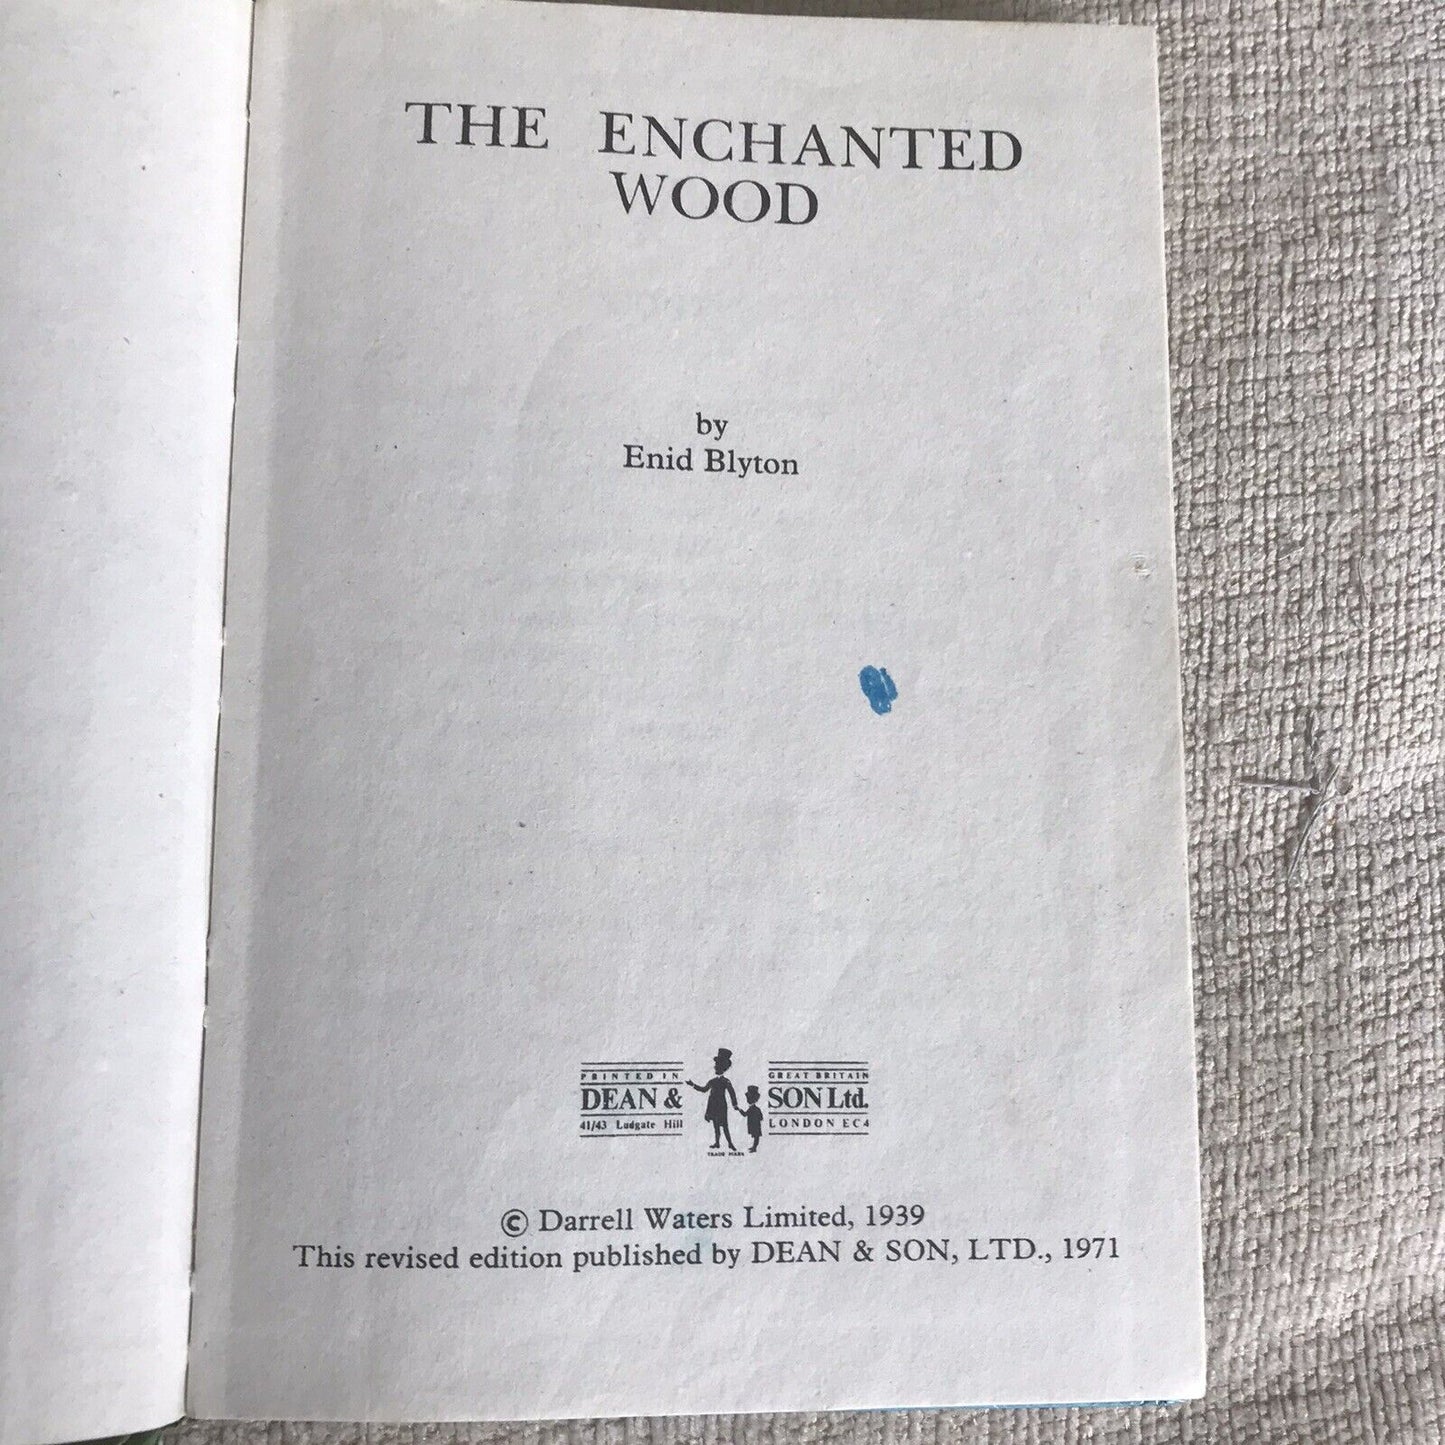 THE ENCHANTED WOOD by Enid Blyton, published by Dean & Son Ltd 1971